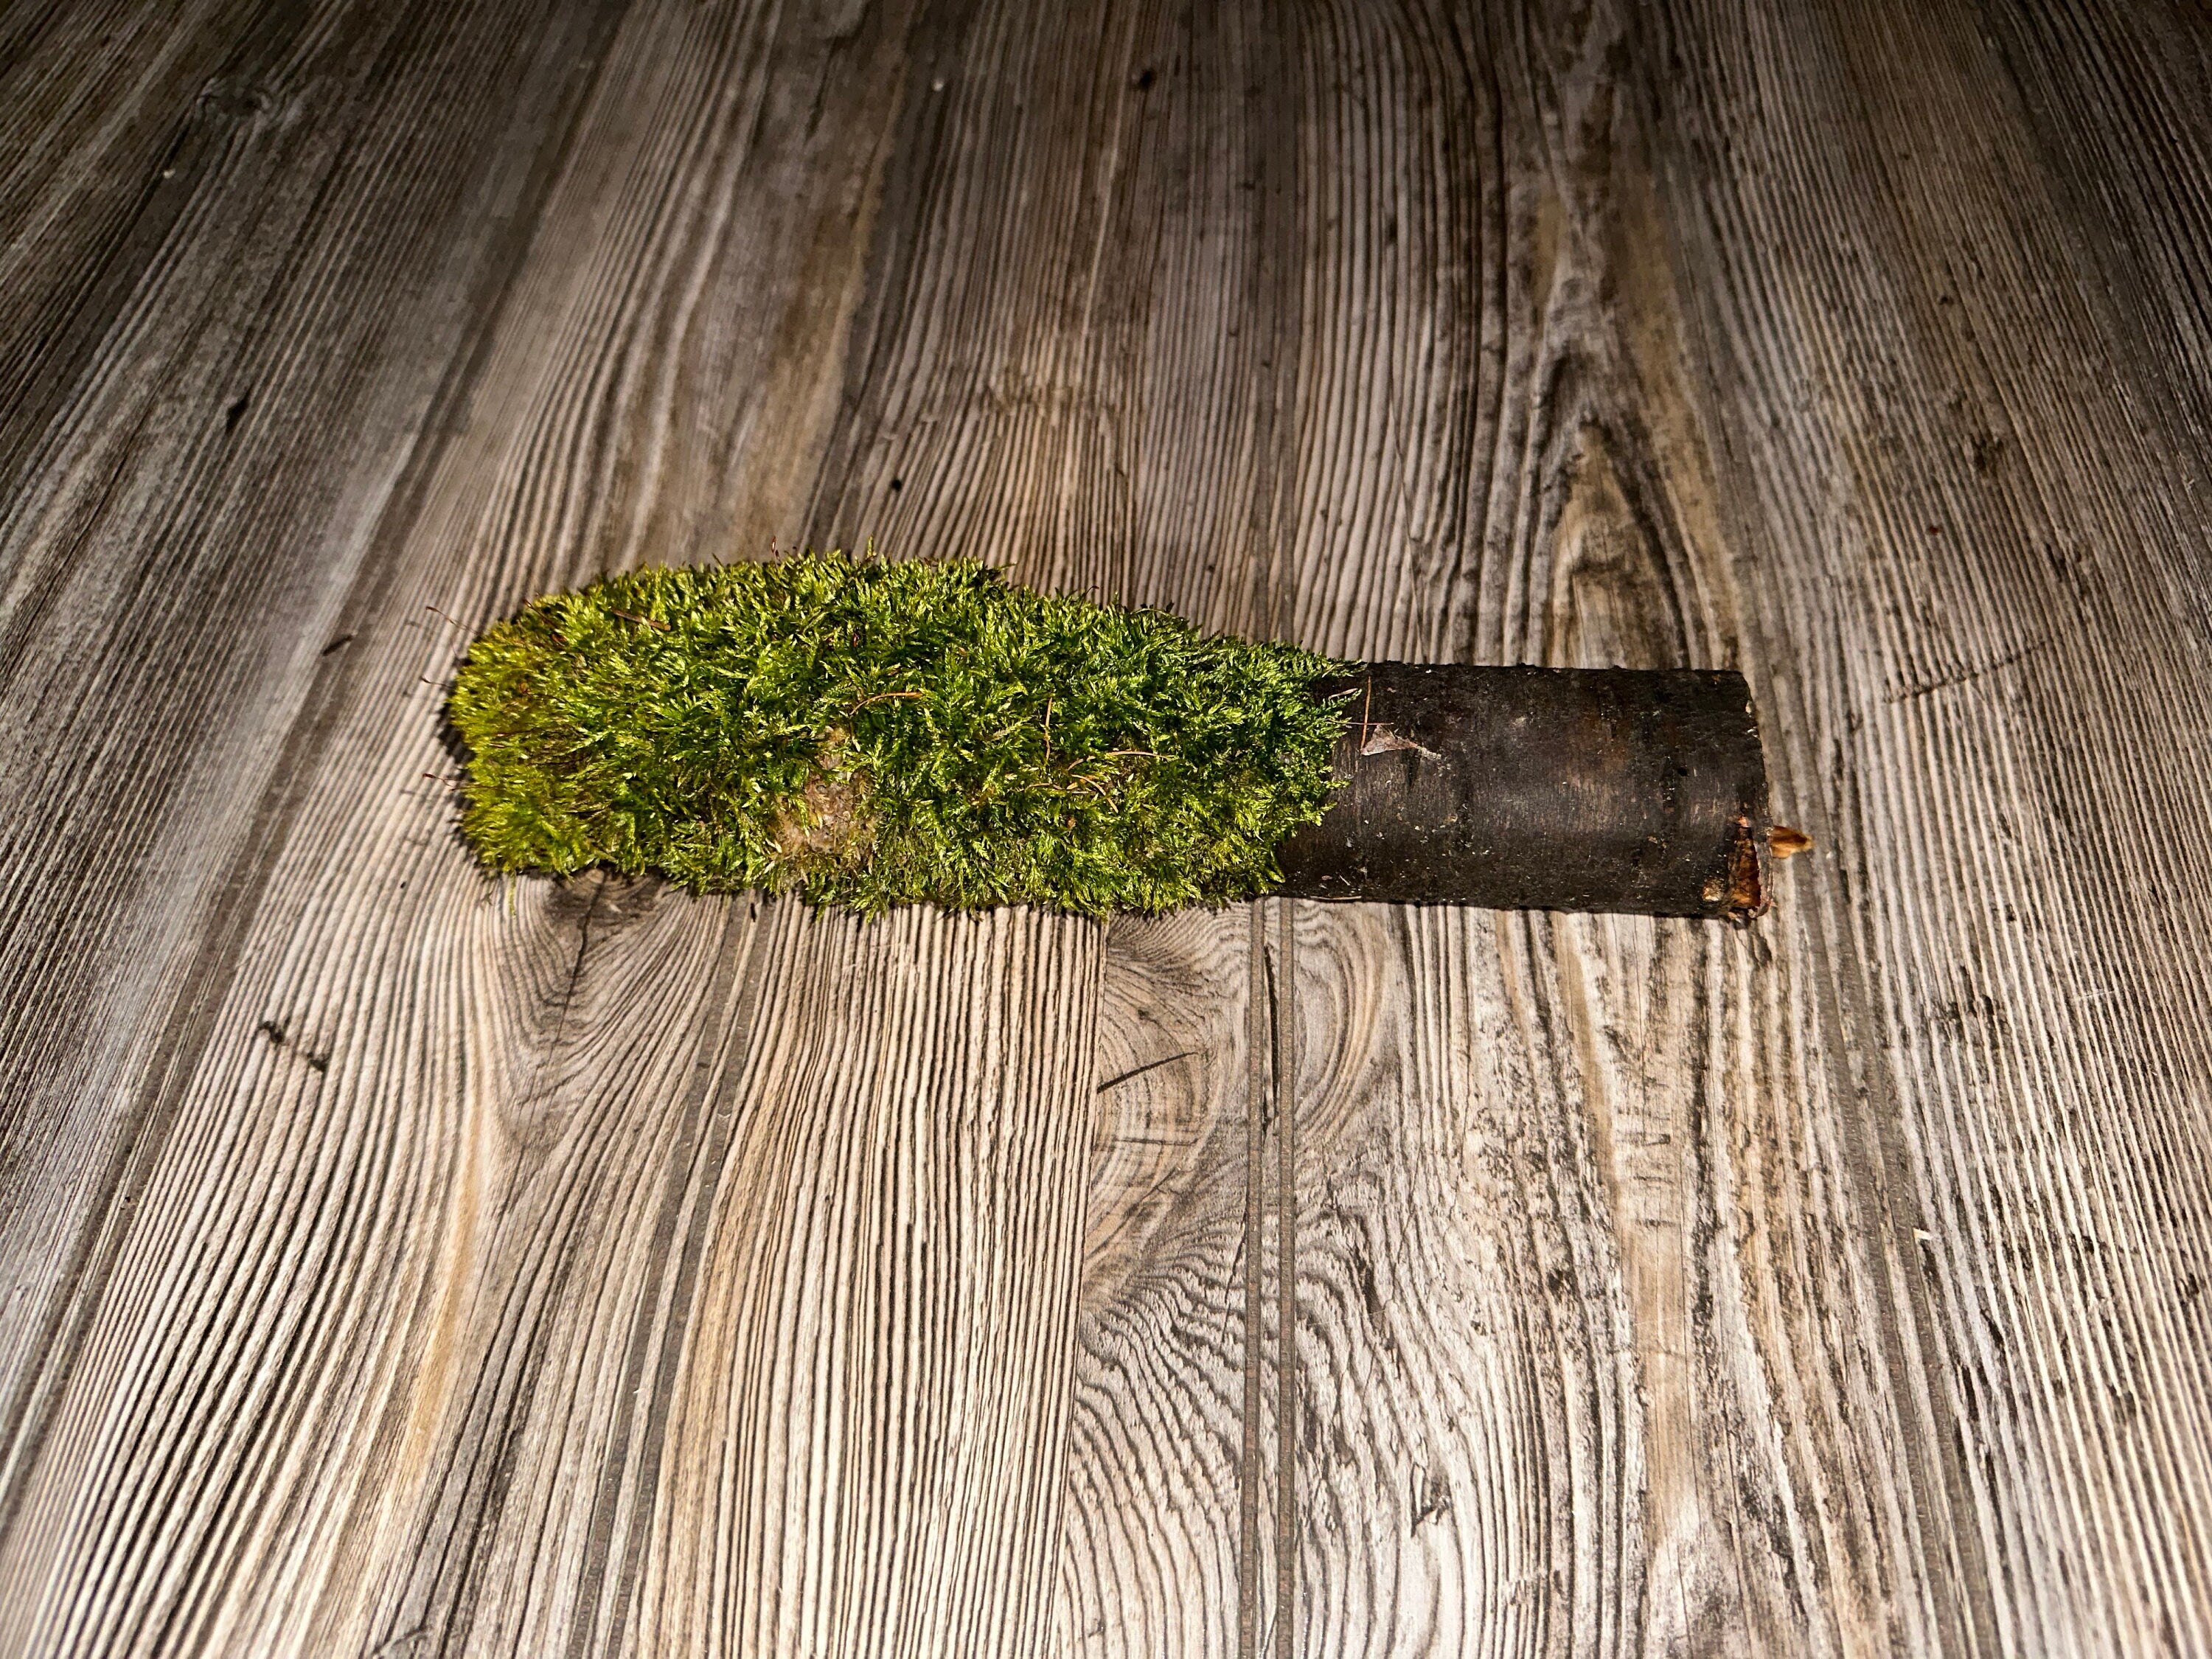 Moss Covered Log, Mossy Log, 9.5 Inches Long by 2 Inches Wide and 2 Inches High